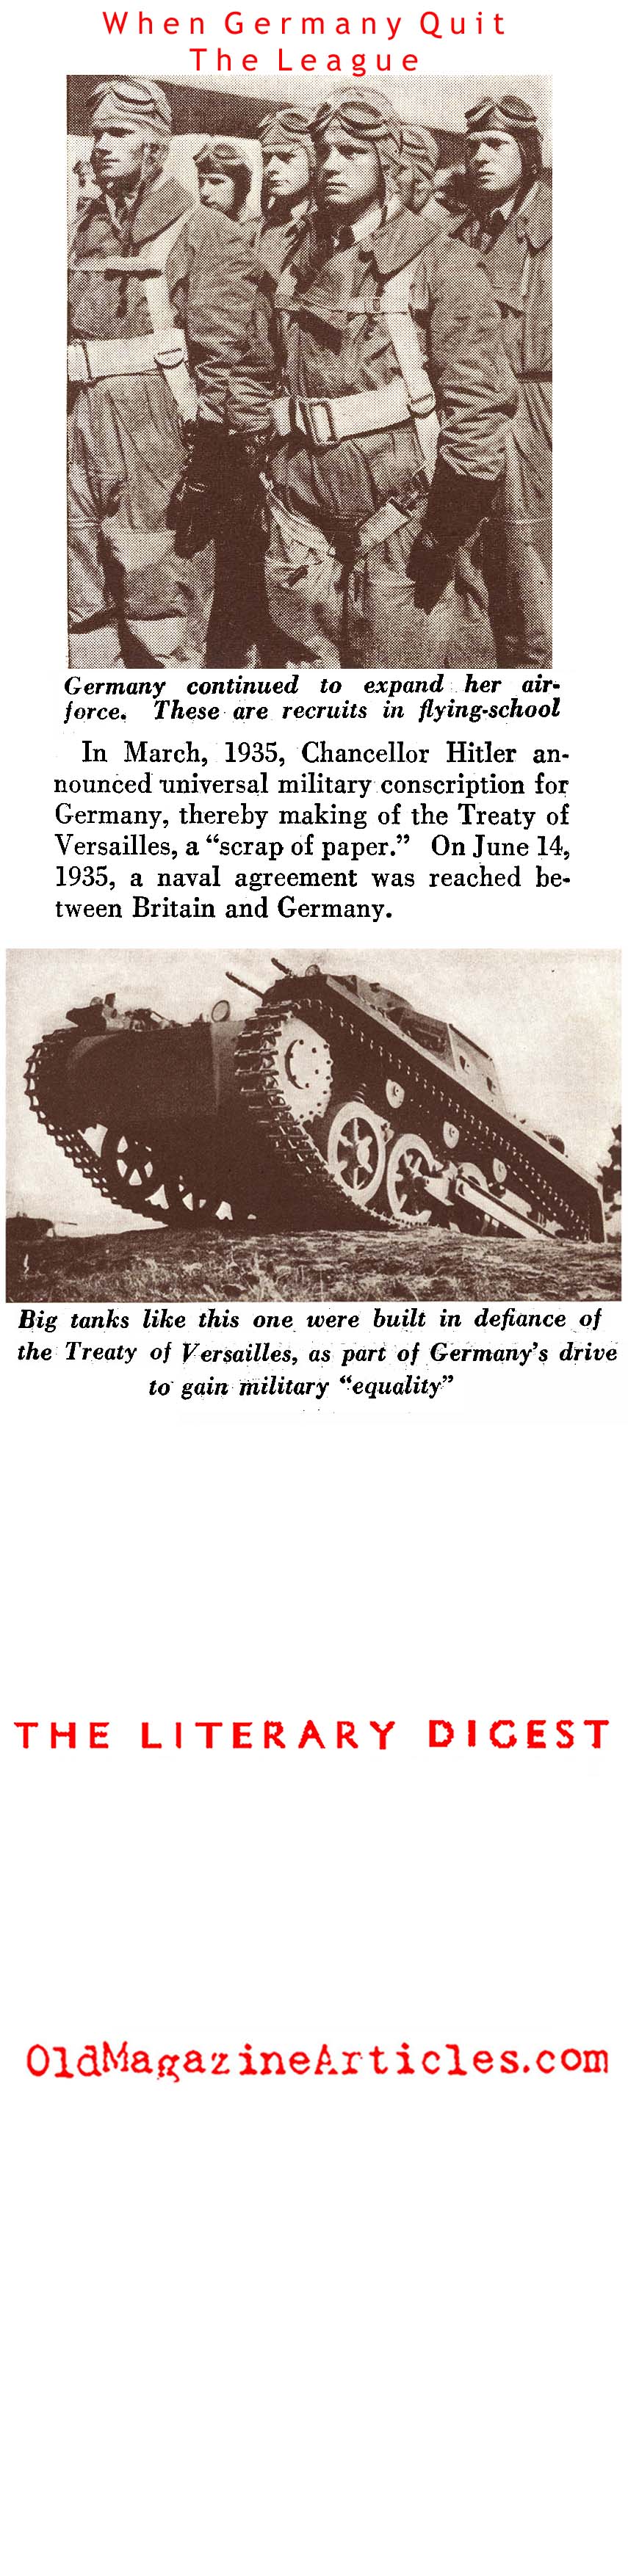 When Germany Quit the League of Nations (Literary Digest, 1935)